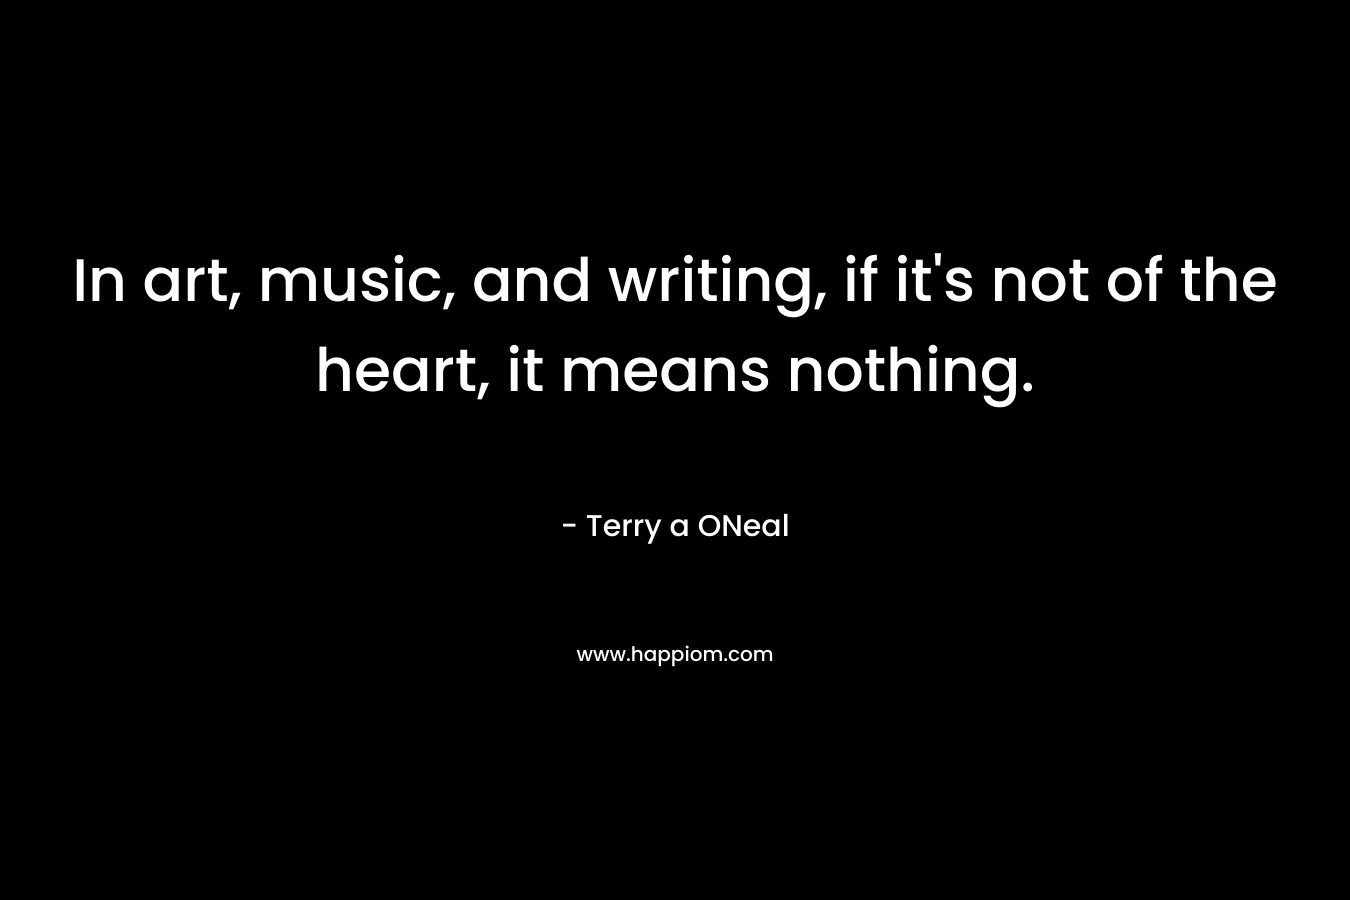 In art, music, and writing, if it's not of the heart, it means nothing.